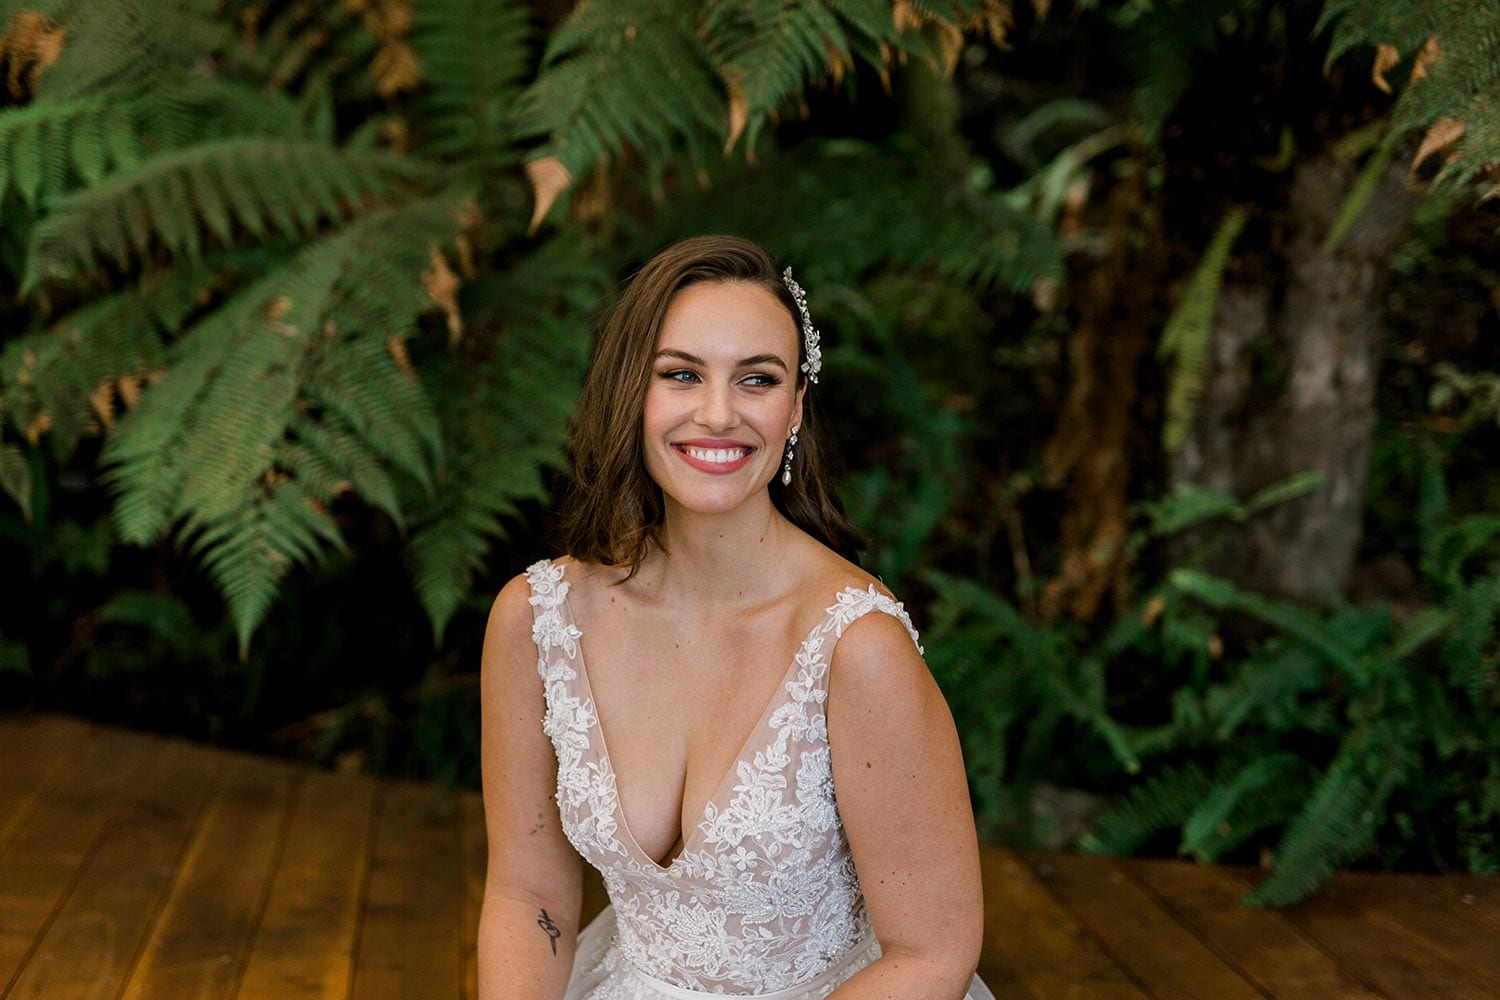 Vivian Wedding gown from Vinka Design - A stunning gown with a deep V-neckline on both the front & back. Fitted semi-sheer nude bodice embellished with a beaded floral lace, a soft layered tulle skirt. Worn in conservatory with fern background, close up of top.